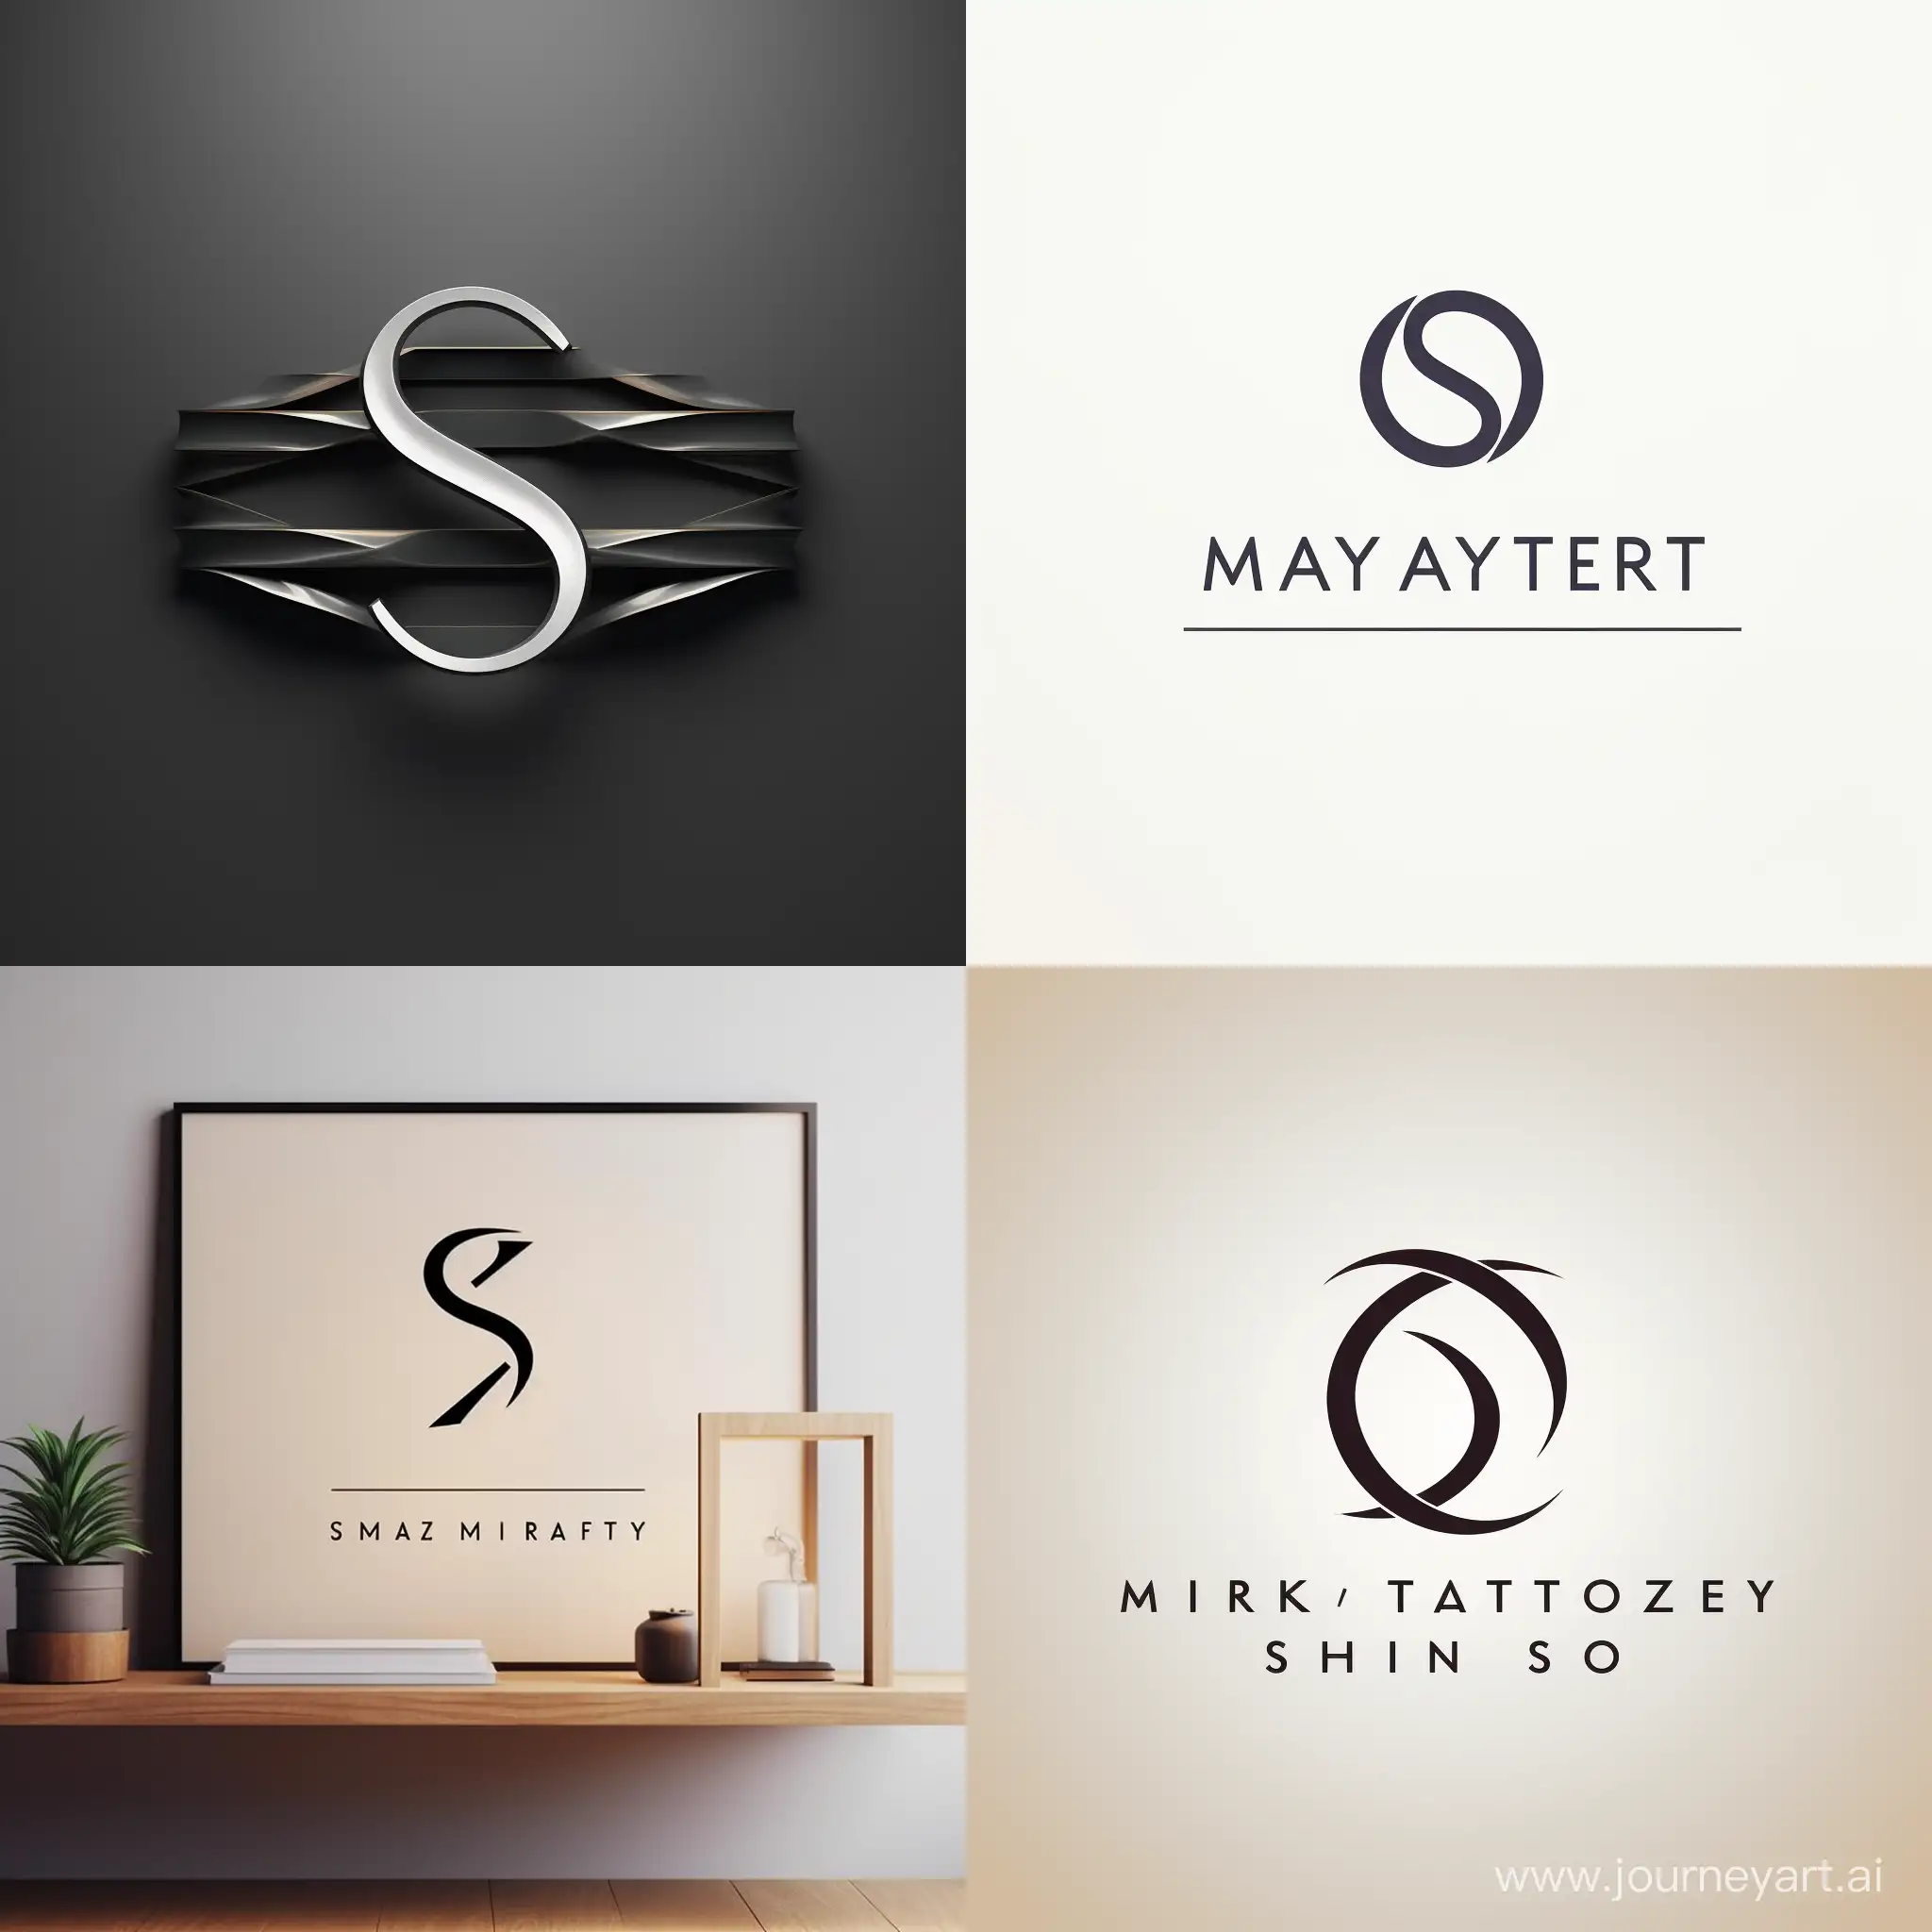 a simple minimal modern logo, the text of logo is "Story Matters" in Azonix font, turn first letters of "Story" and "Matters" into minimal creative logo, make a logo out of letter S and M